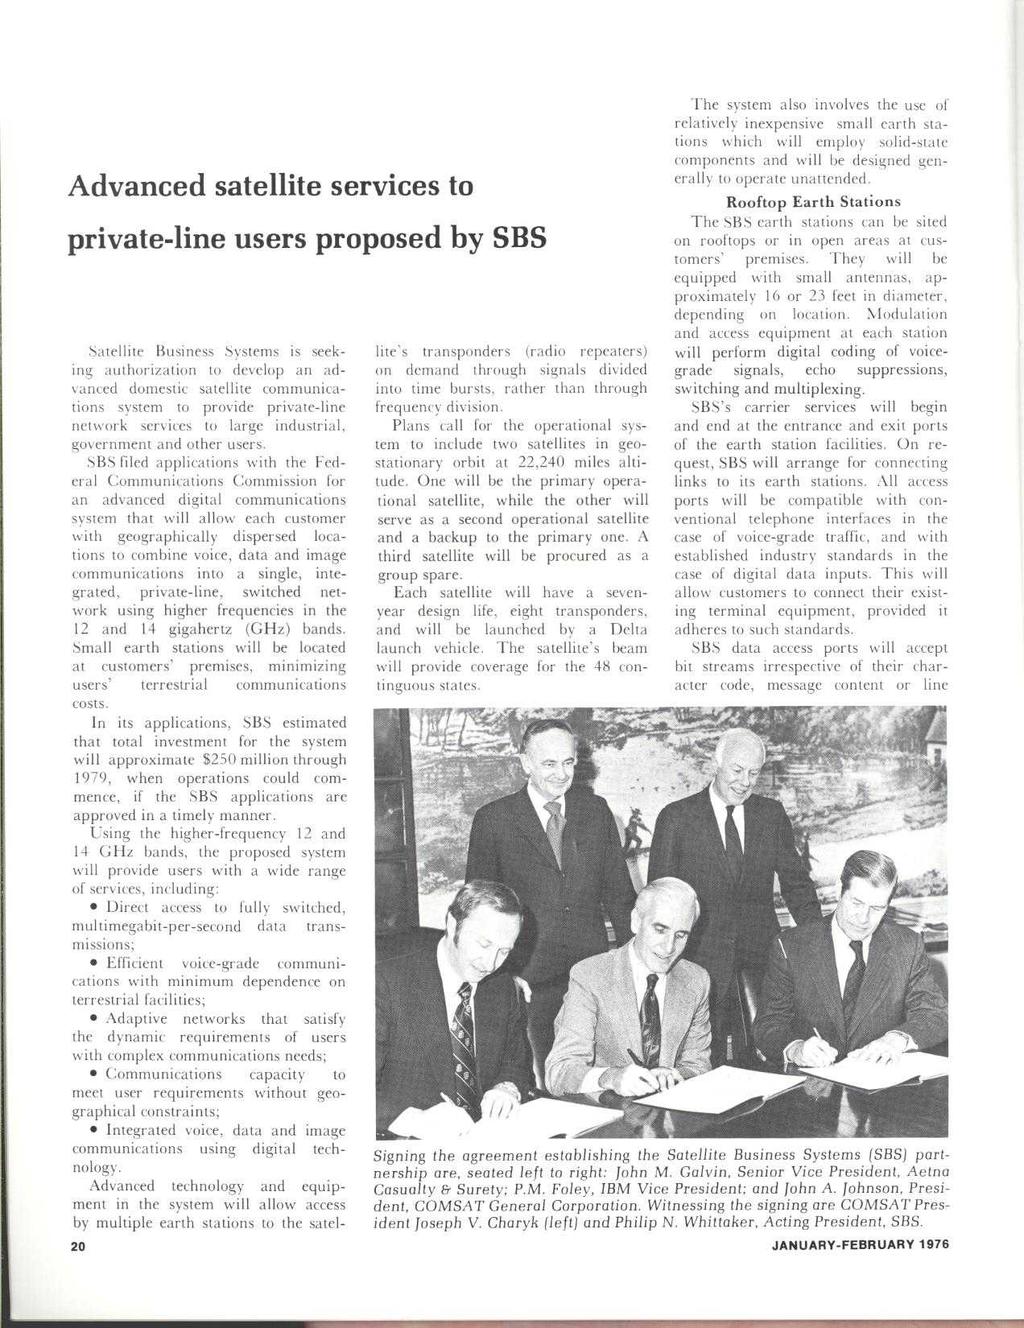 Advanced satellite services to private-line users proposed by SBS.